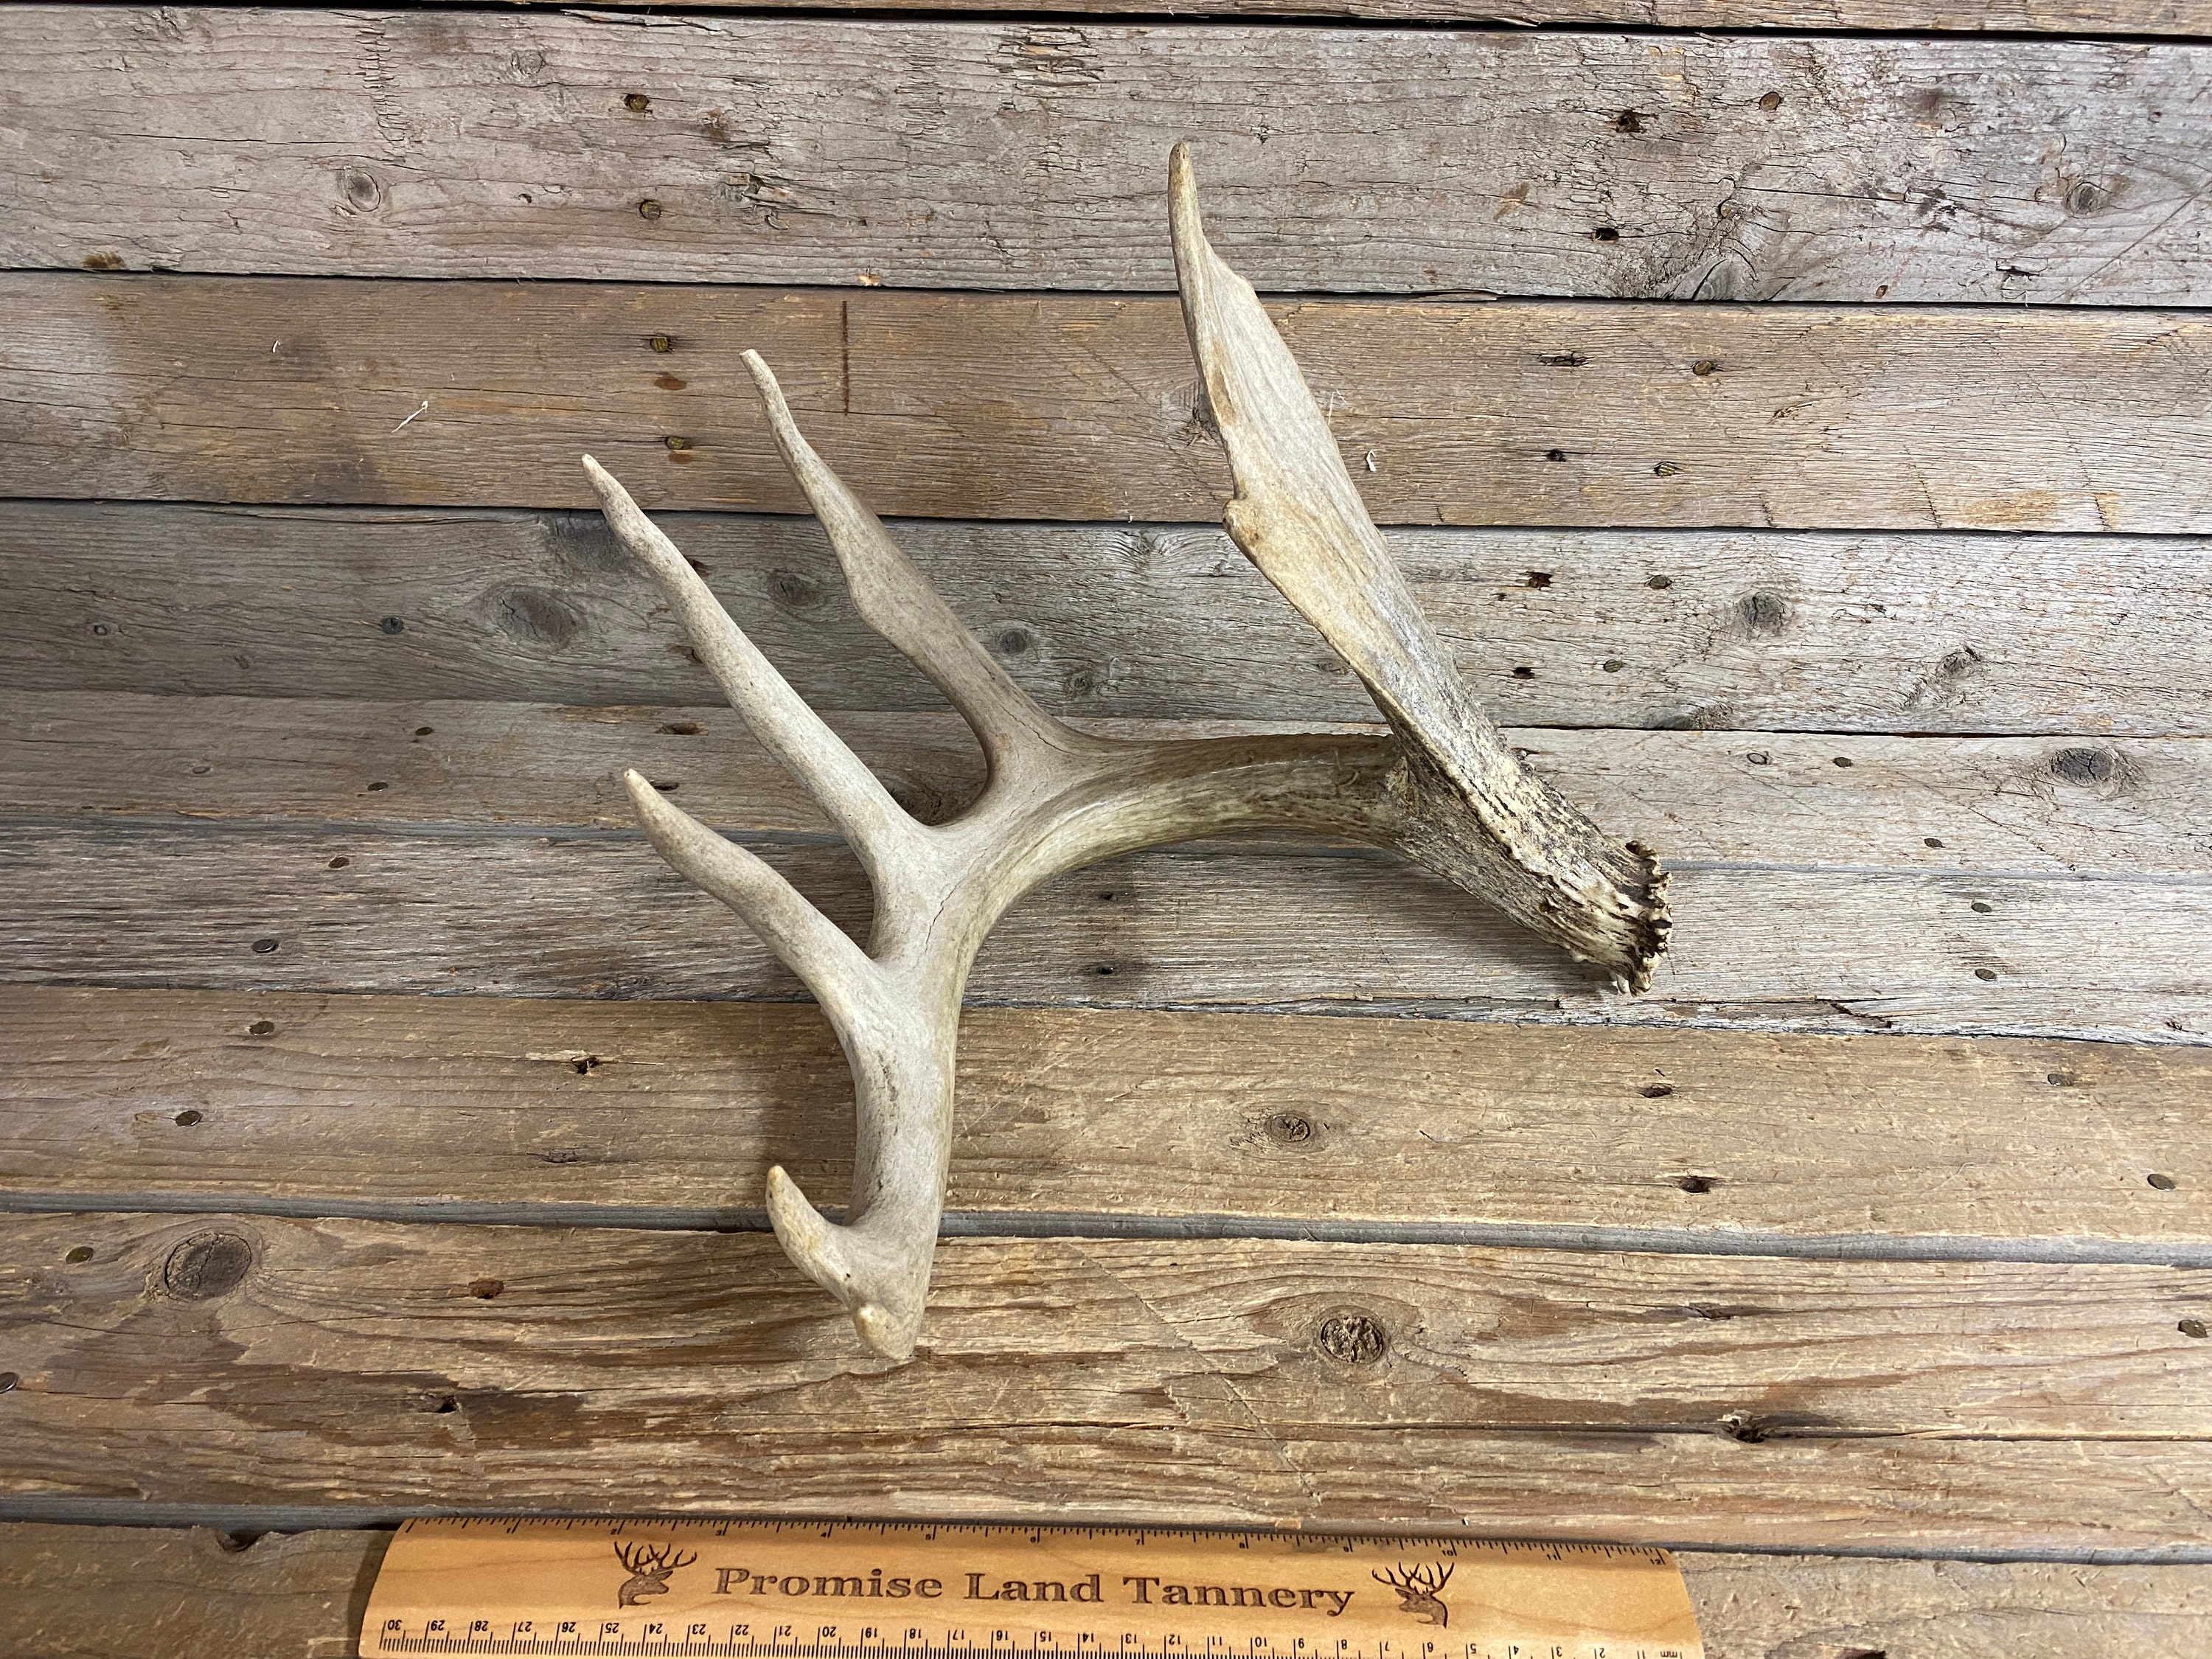 When Do Deer Shed Their Antlers? And 6 Other Antler Questions